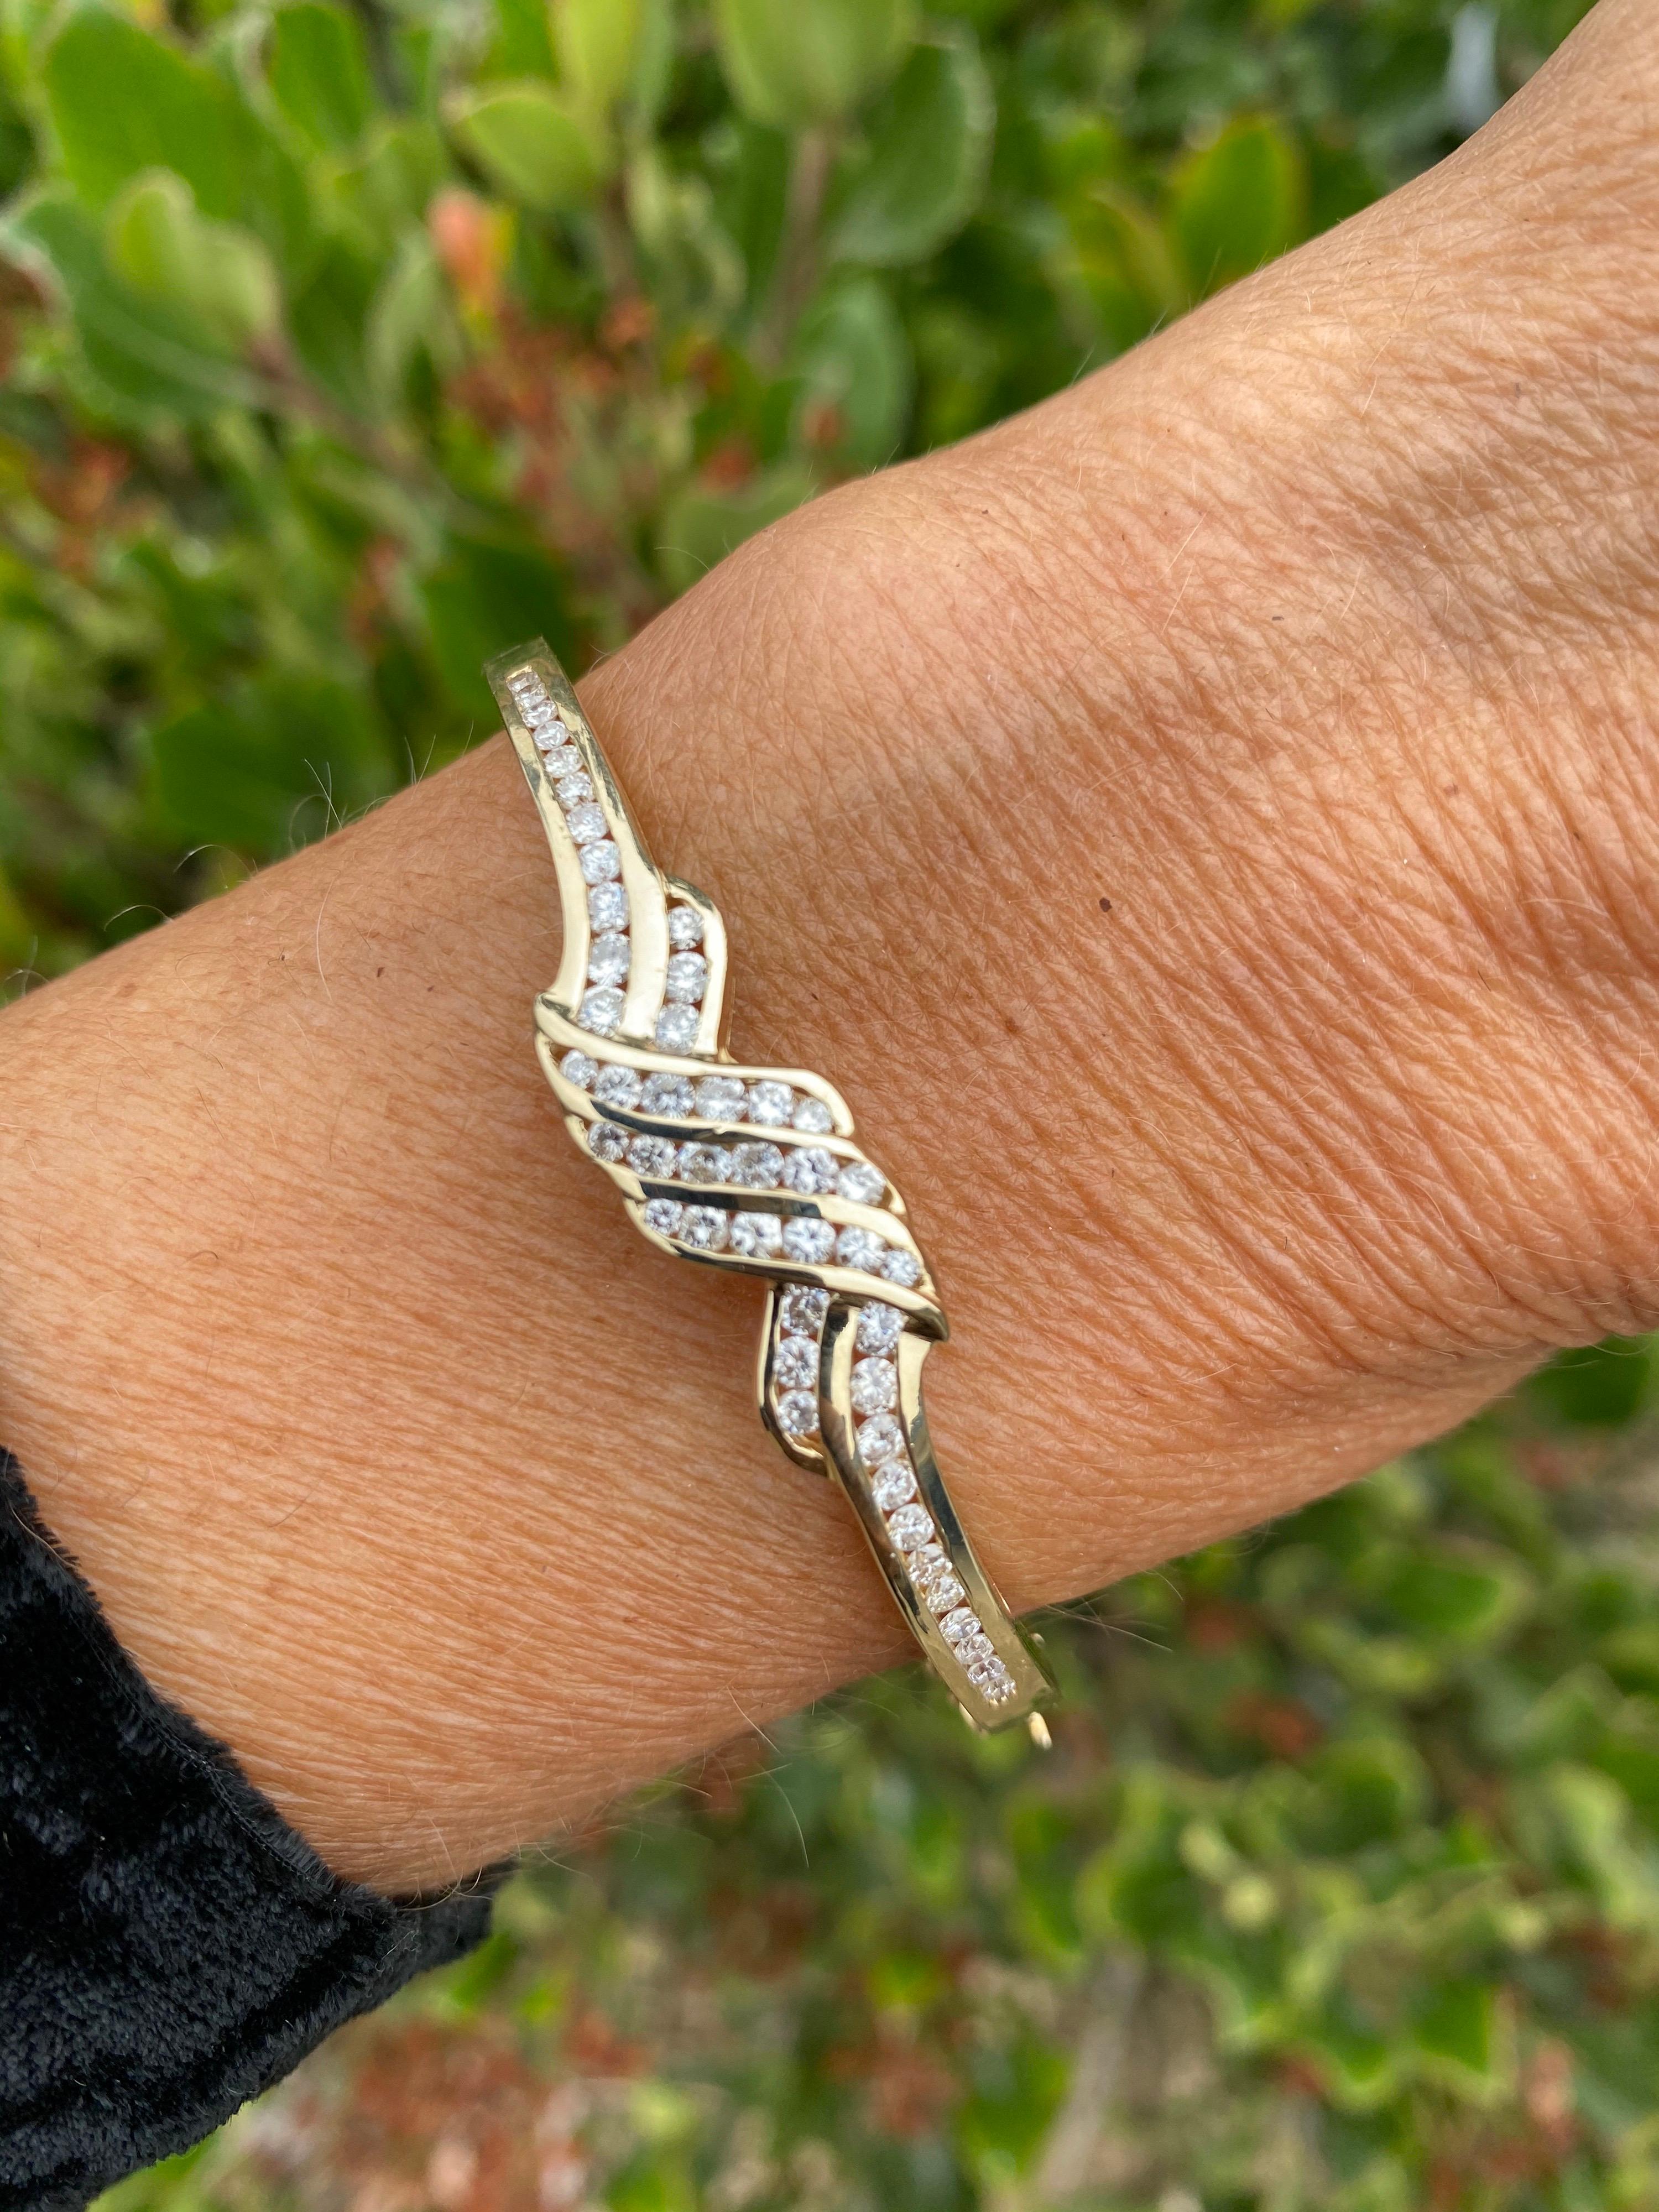 Channel Diamond Bracelet

14 karat yellow gold measuring 10.74 mm wide.
The berth width of the diamonds are 55.40 mm and compasses the top portion of the bracelet.
The height is 5.07 mm tall with plenty of support
Substantial gold weight is 17.6